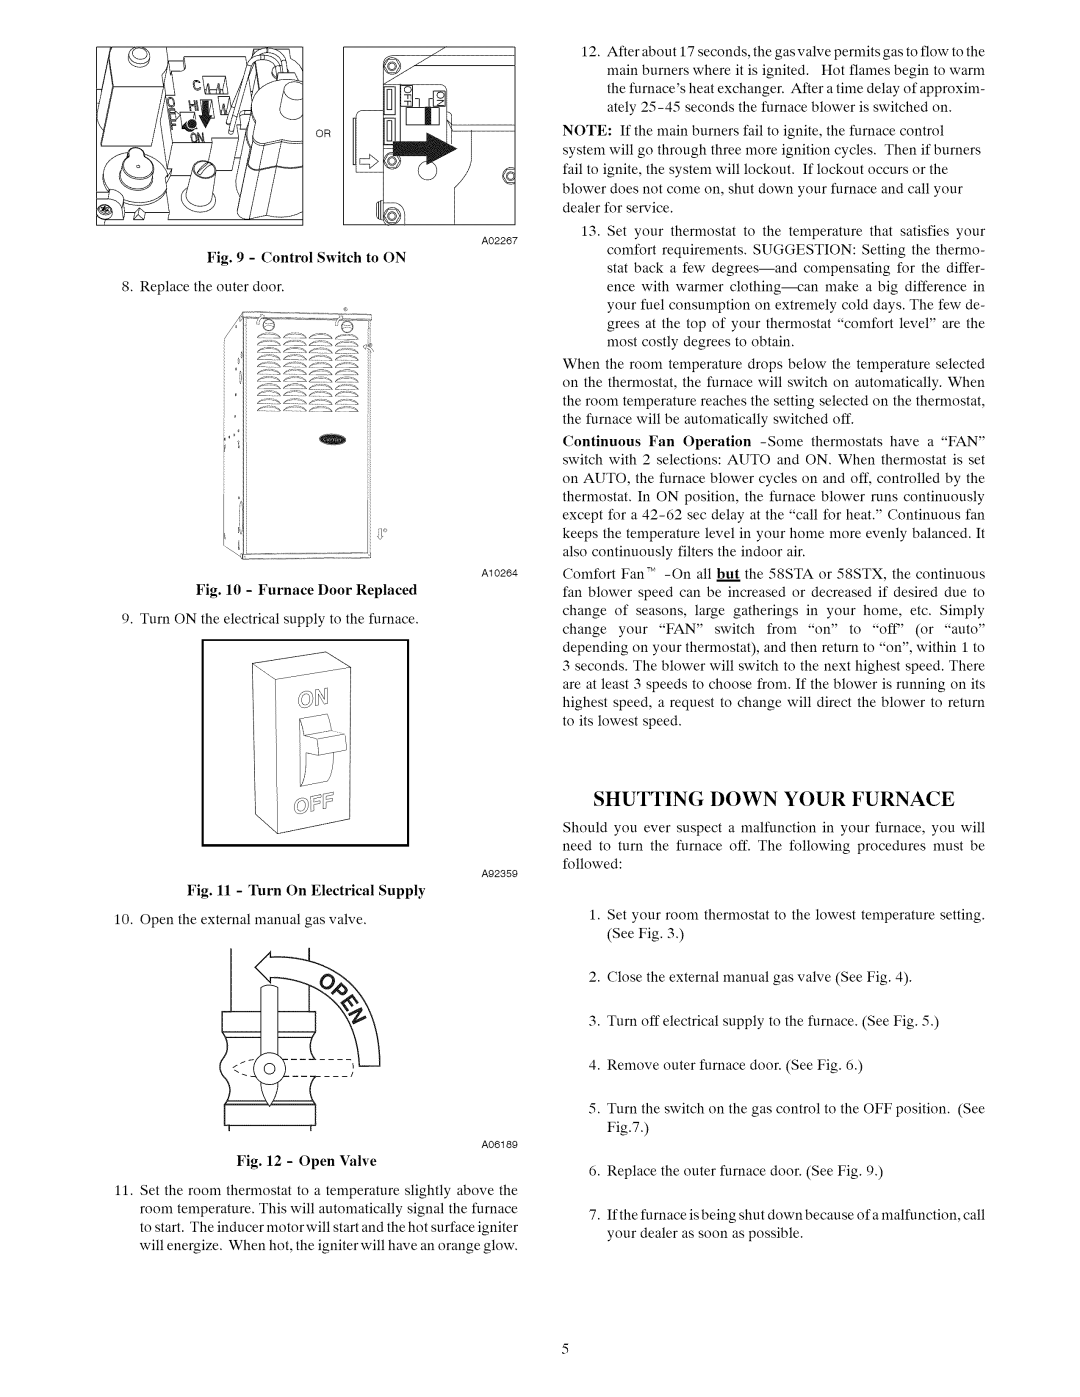 Carrier A10247 owner manual Shutting Down Your Furnace, Furnace Door Replaced, Turn On Electrical Supply 